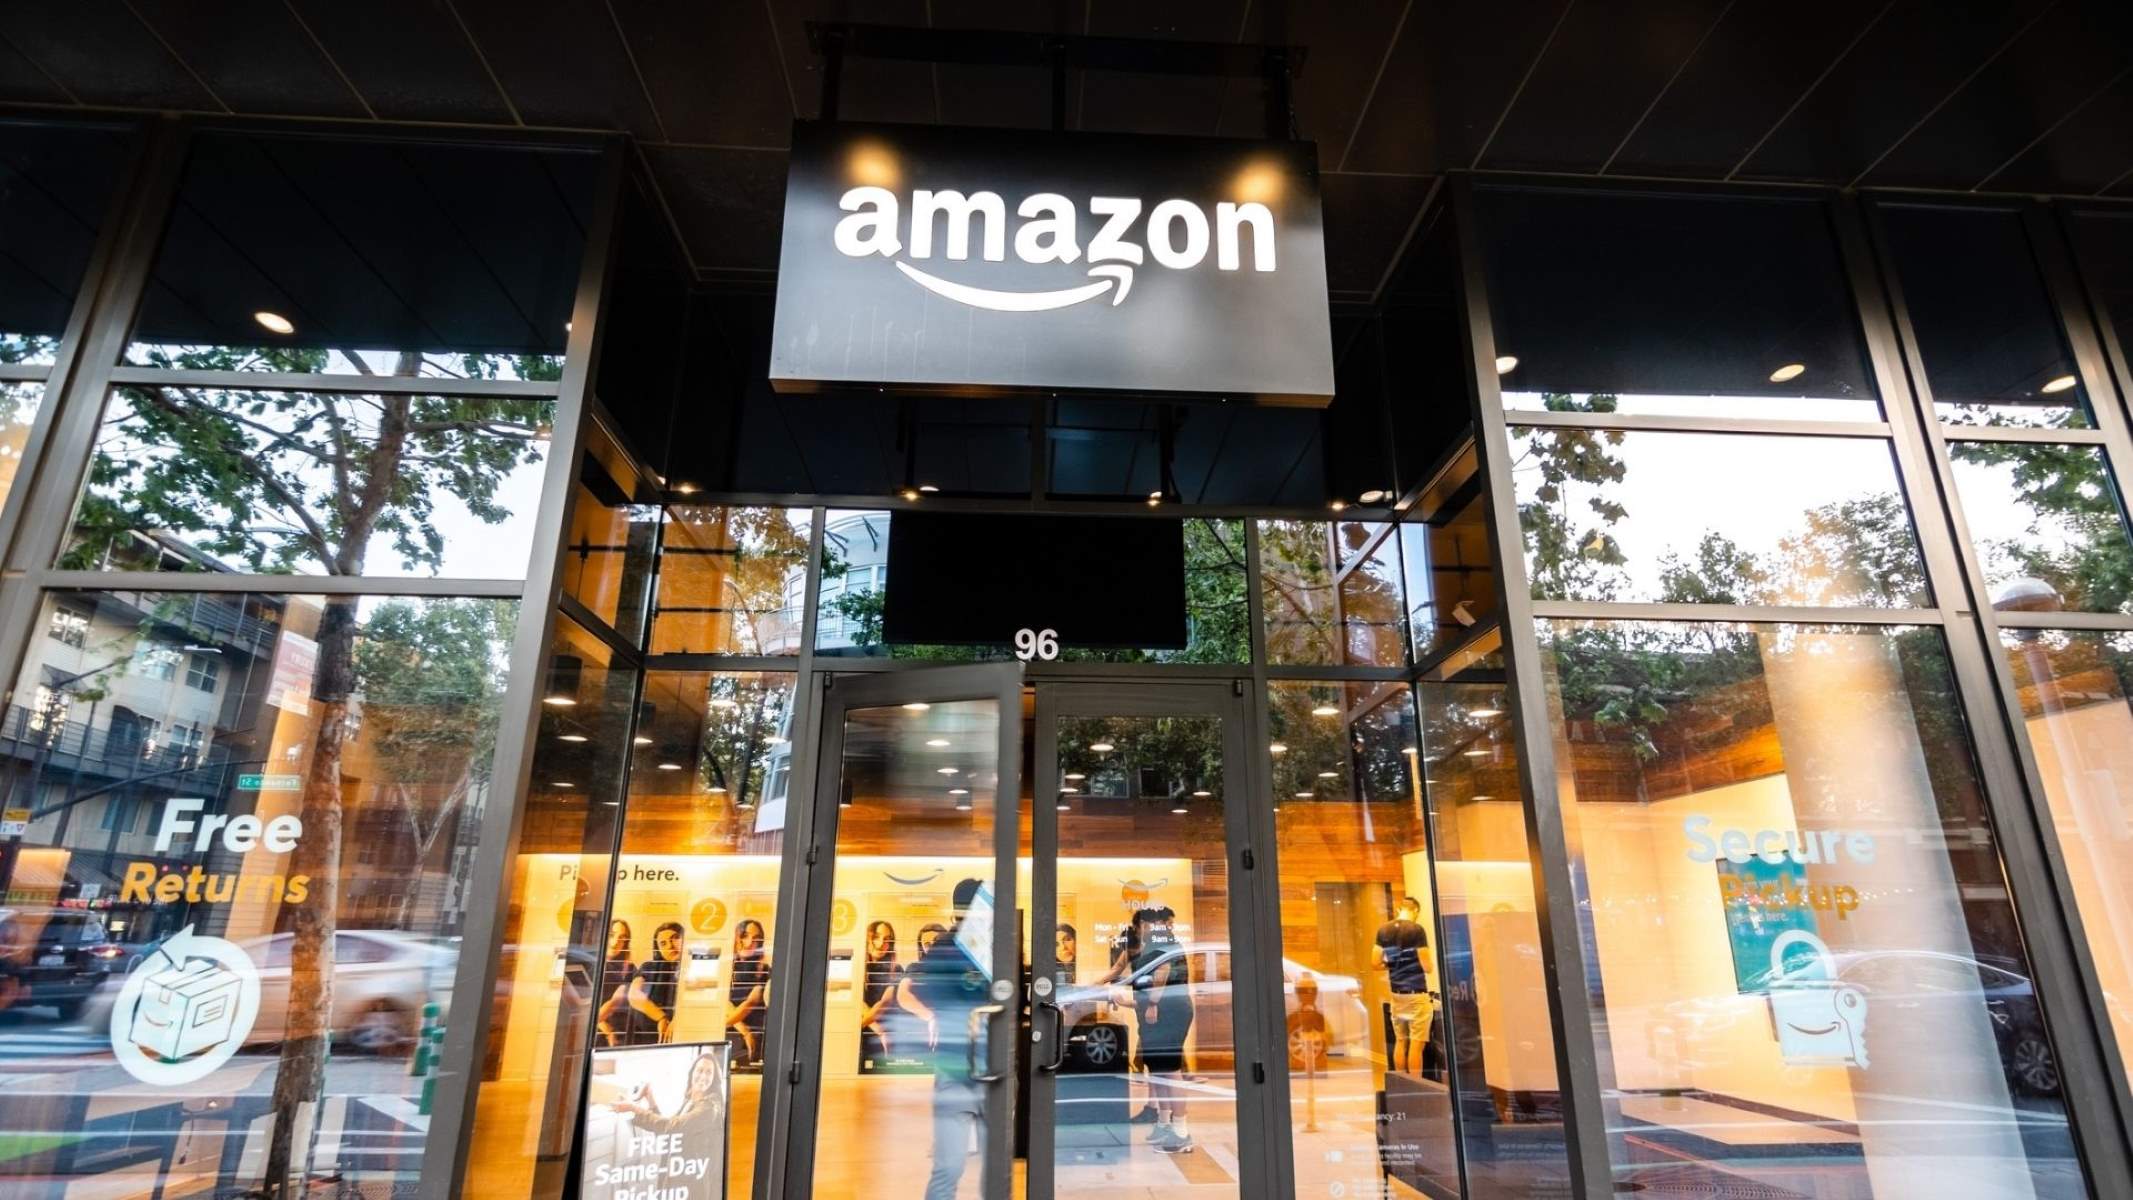 Amazon Appoints Ex-Microsoft Exec Panos Panay To Lead Devices Business